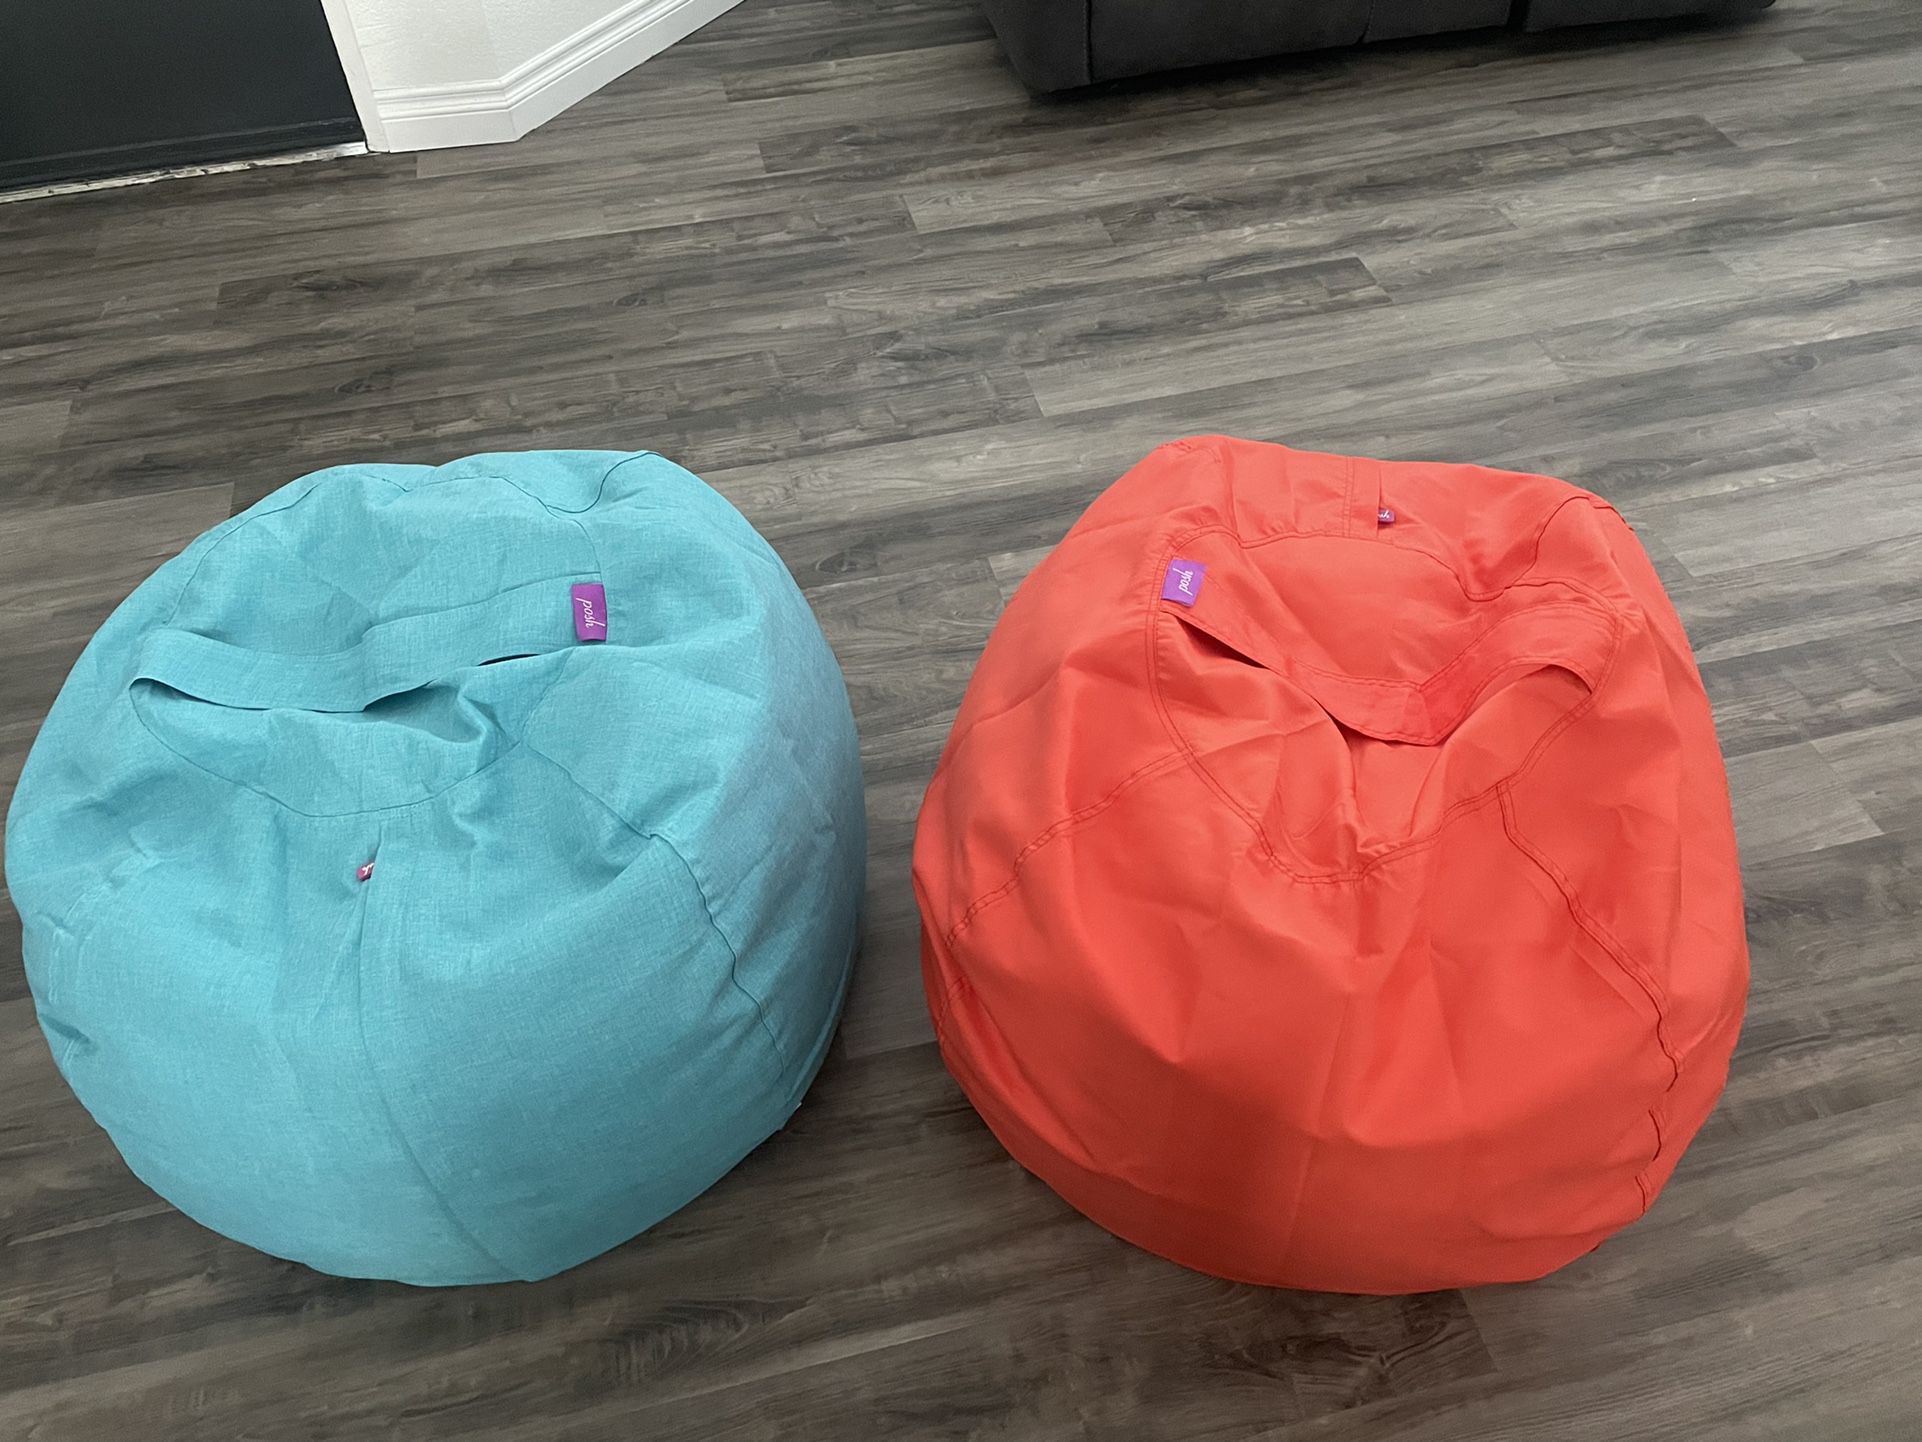 Bean Bag Chairs With Removable Cover With zipper 